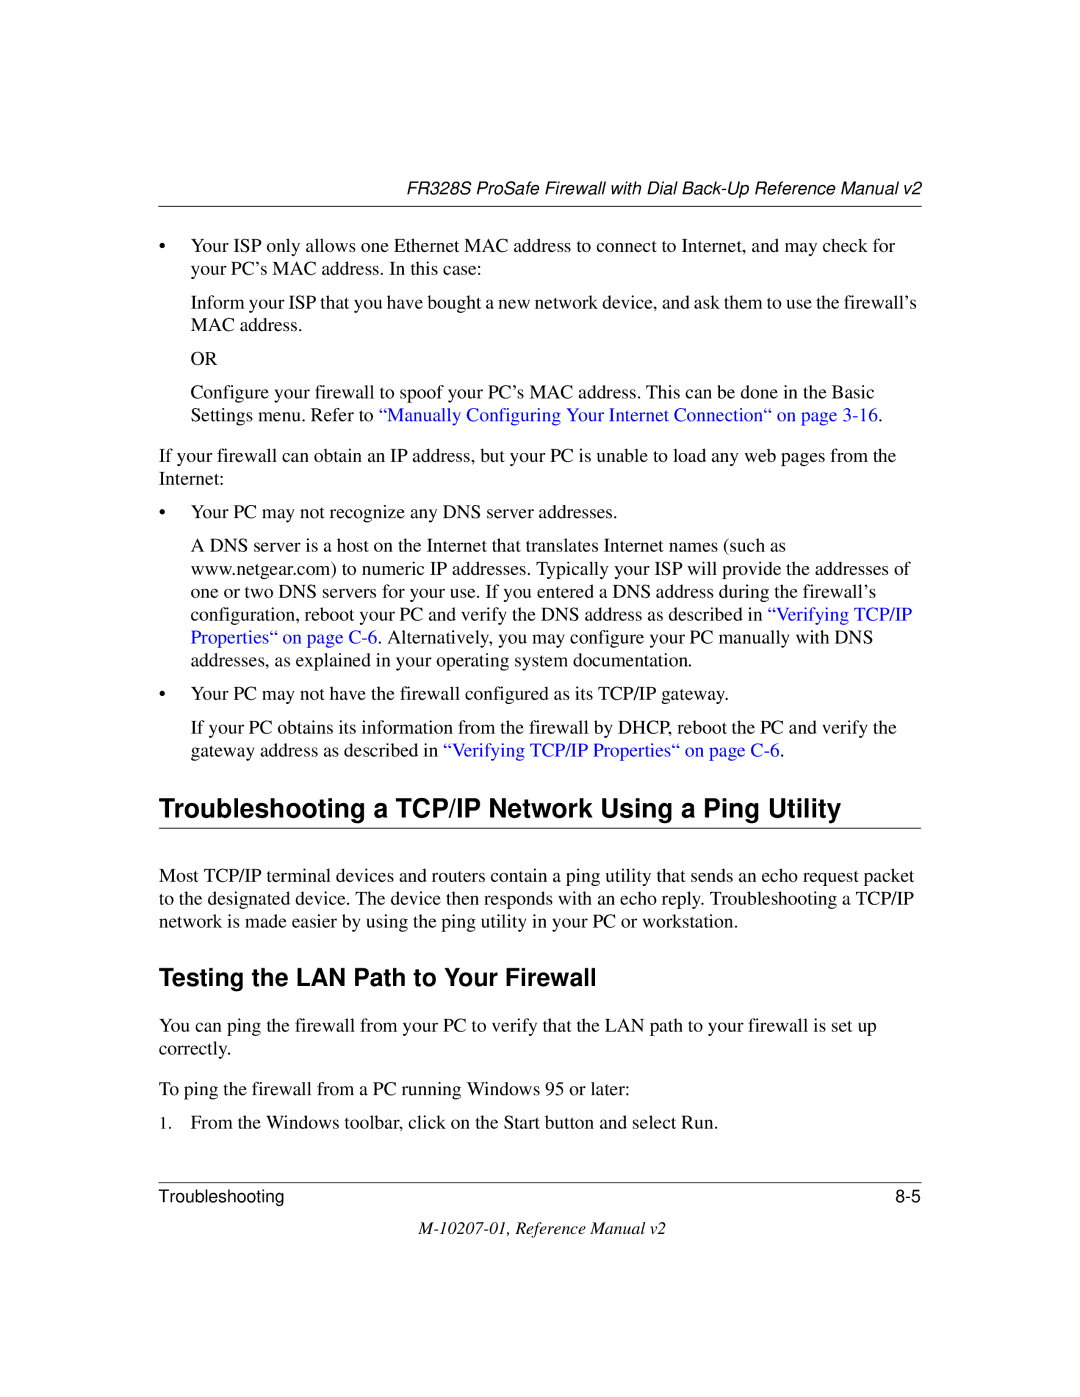 NETGEAR FR328S manual Troubleshooting a TCP/IP Network Using a Ping Utility, Testing the LAN Path to Your Firewall 